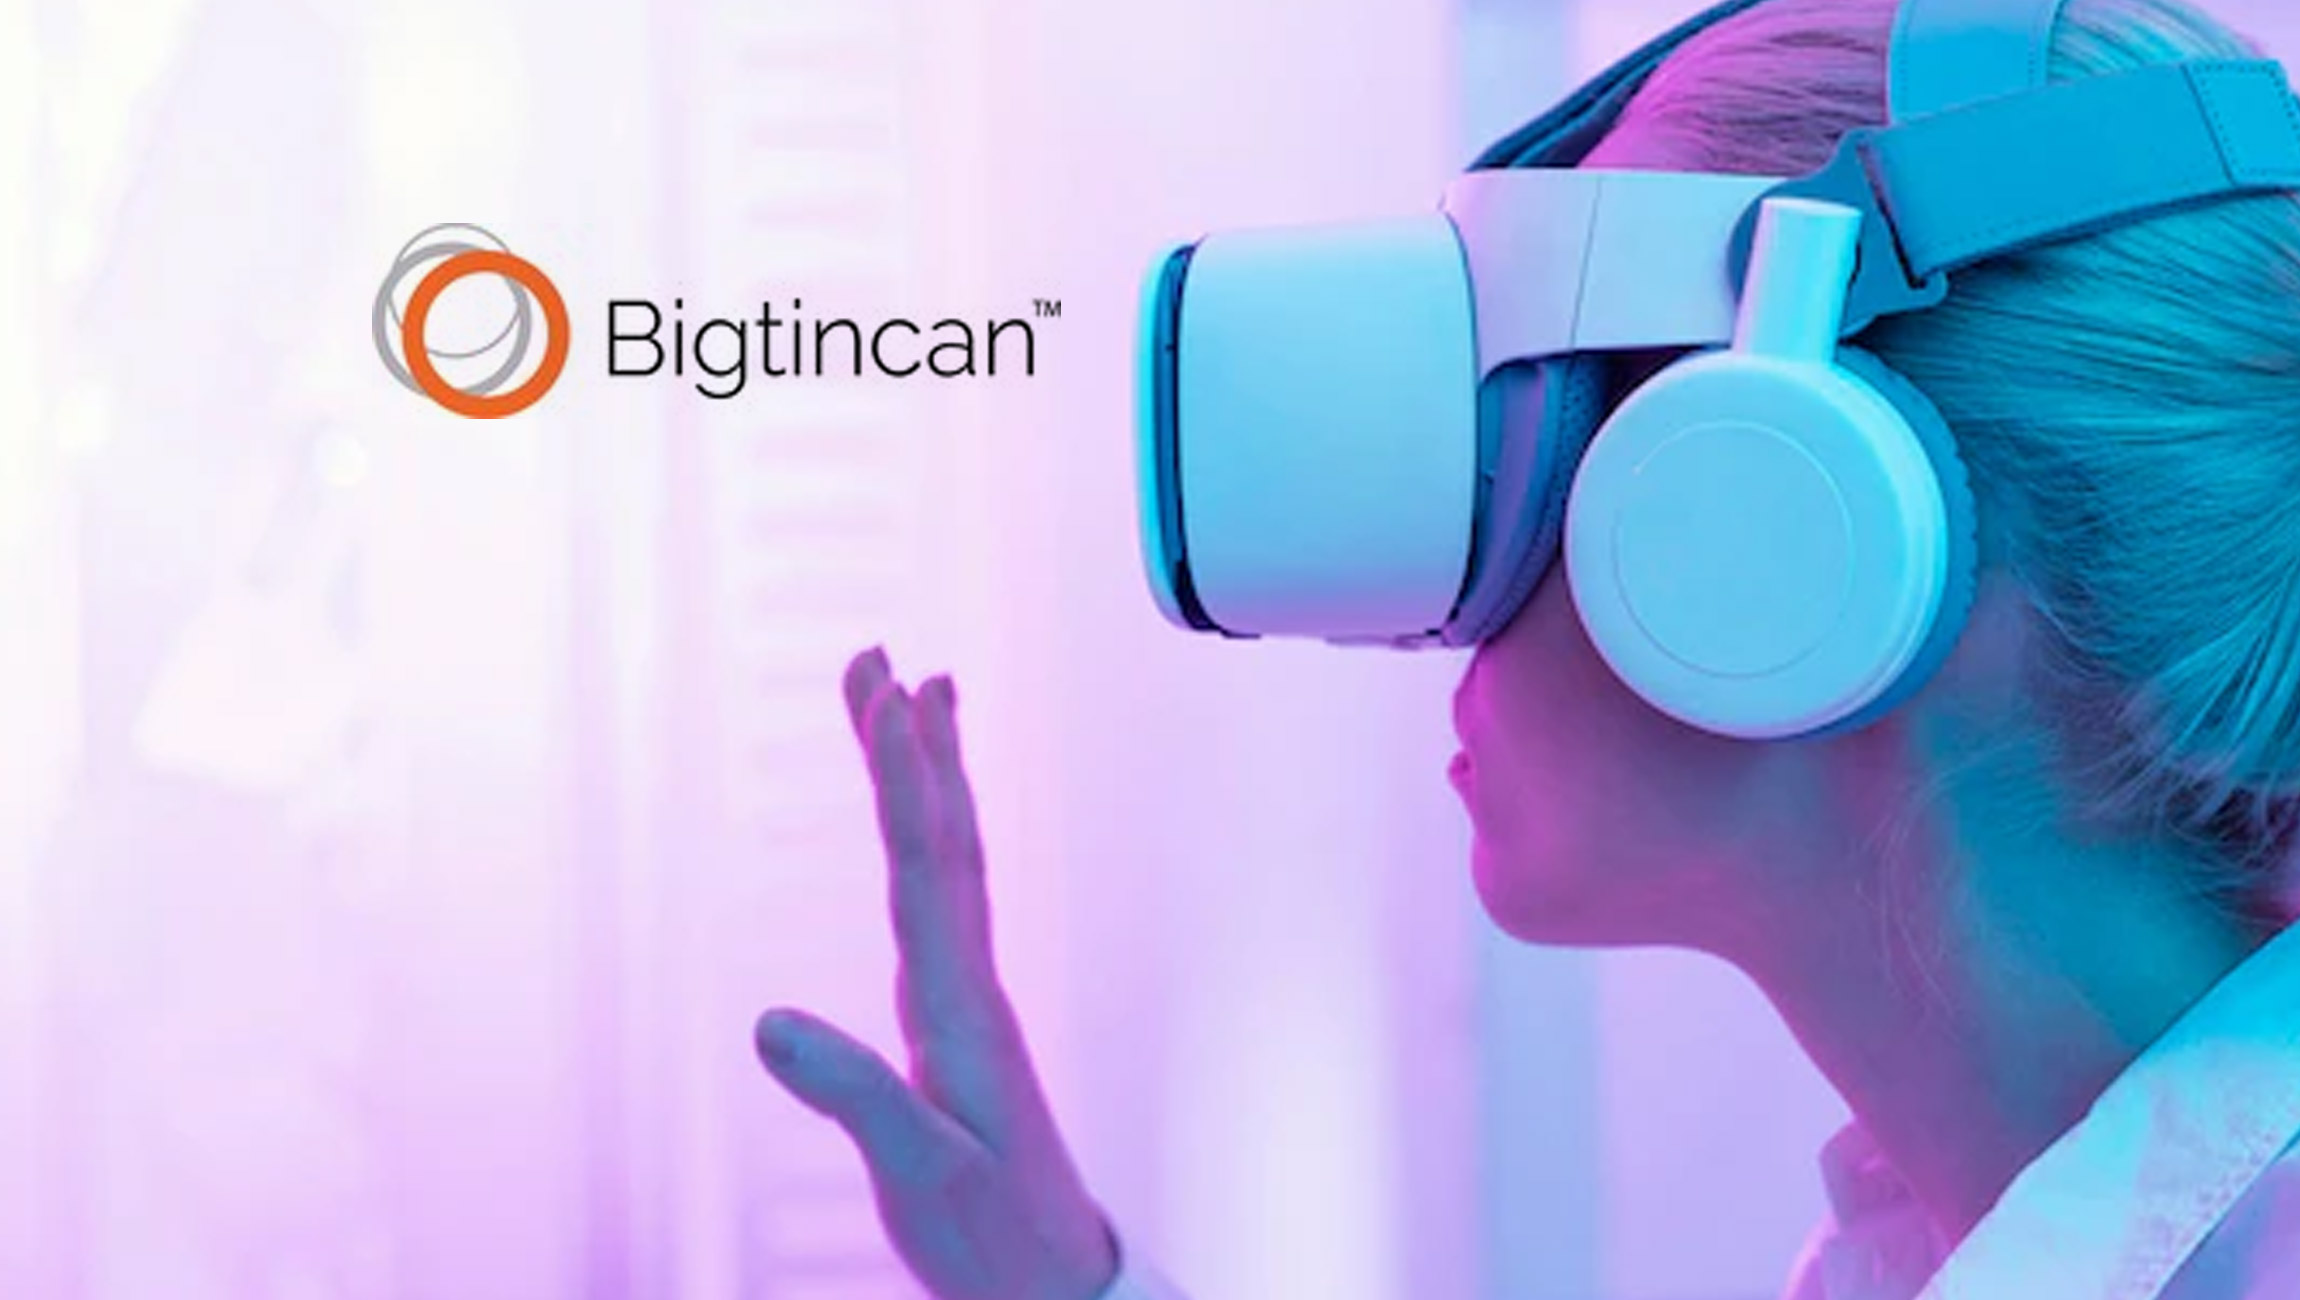 New Virtual Selling and Coaching Technologies from Bigtincan Allow Organizations to Bring the Metaverse and Web 3.0 Technologies to Sales Teams and Customers